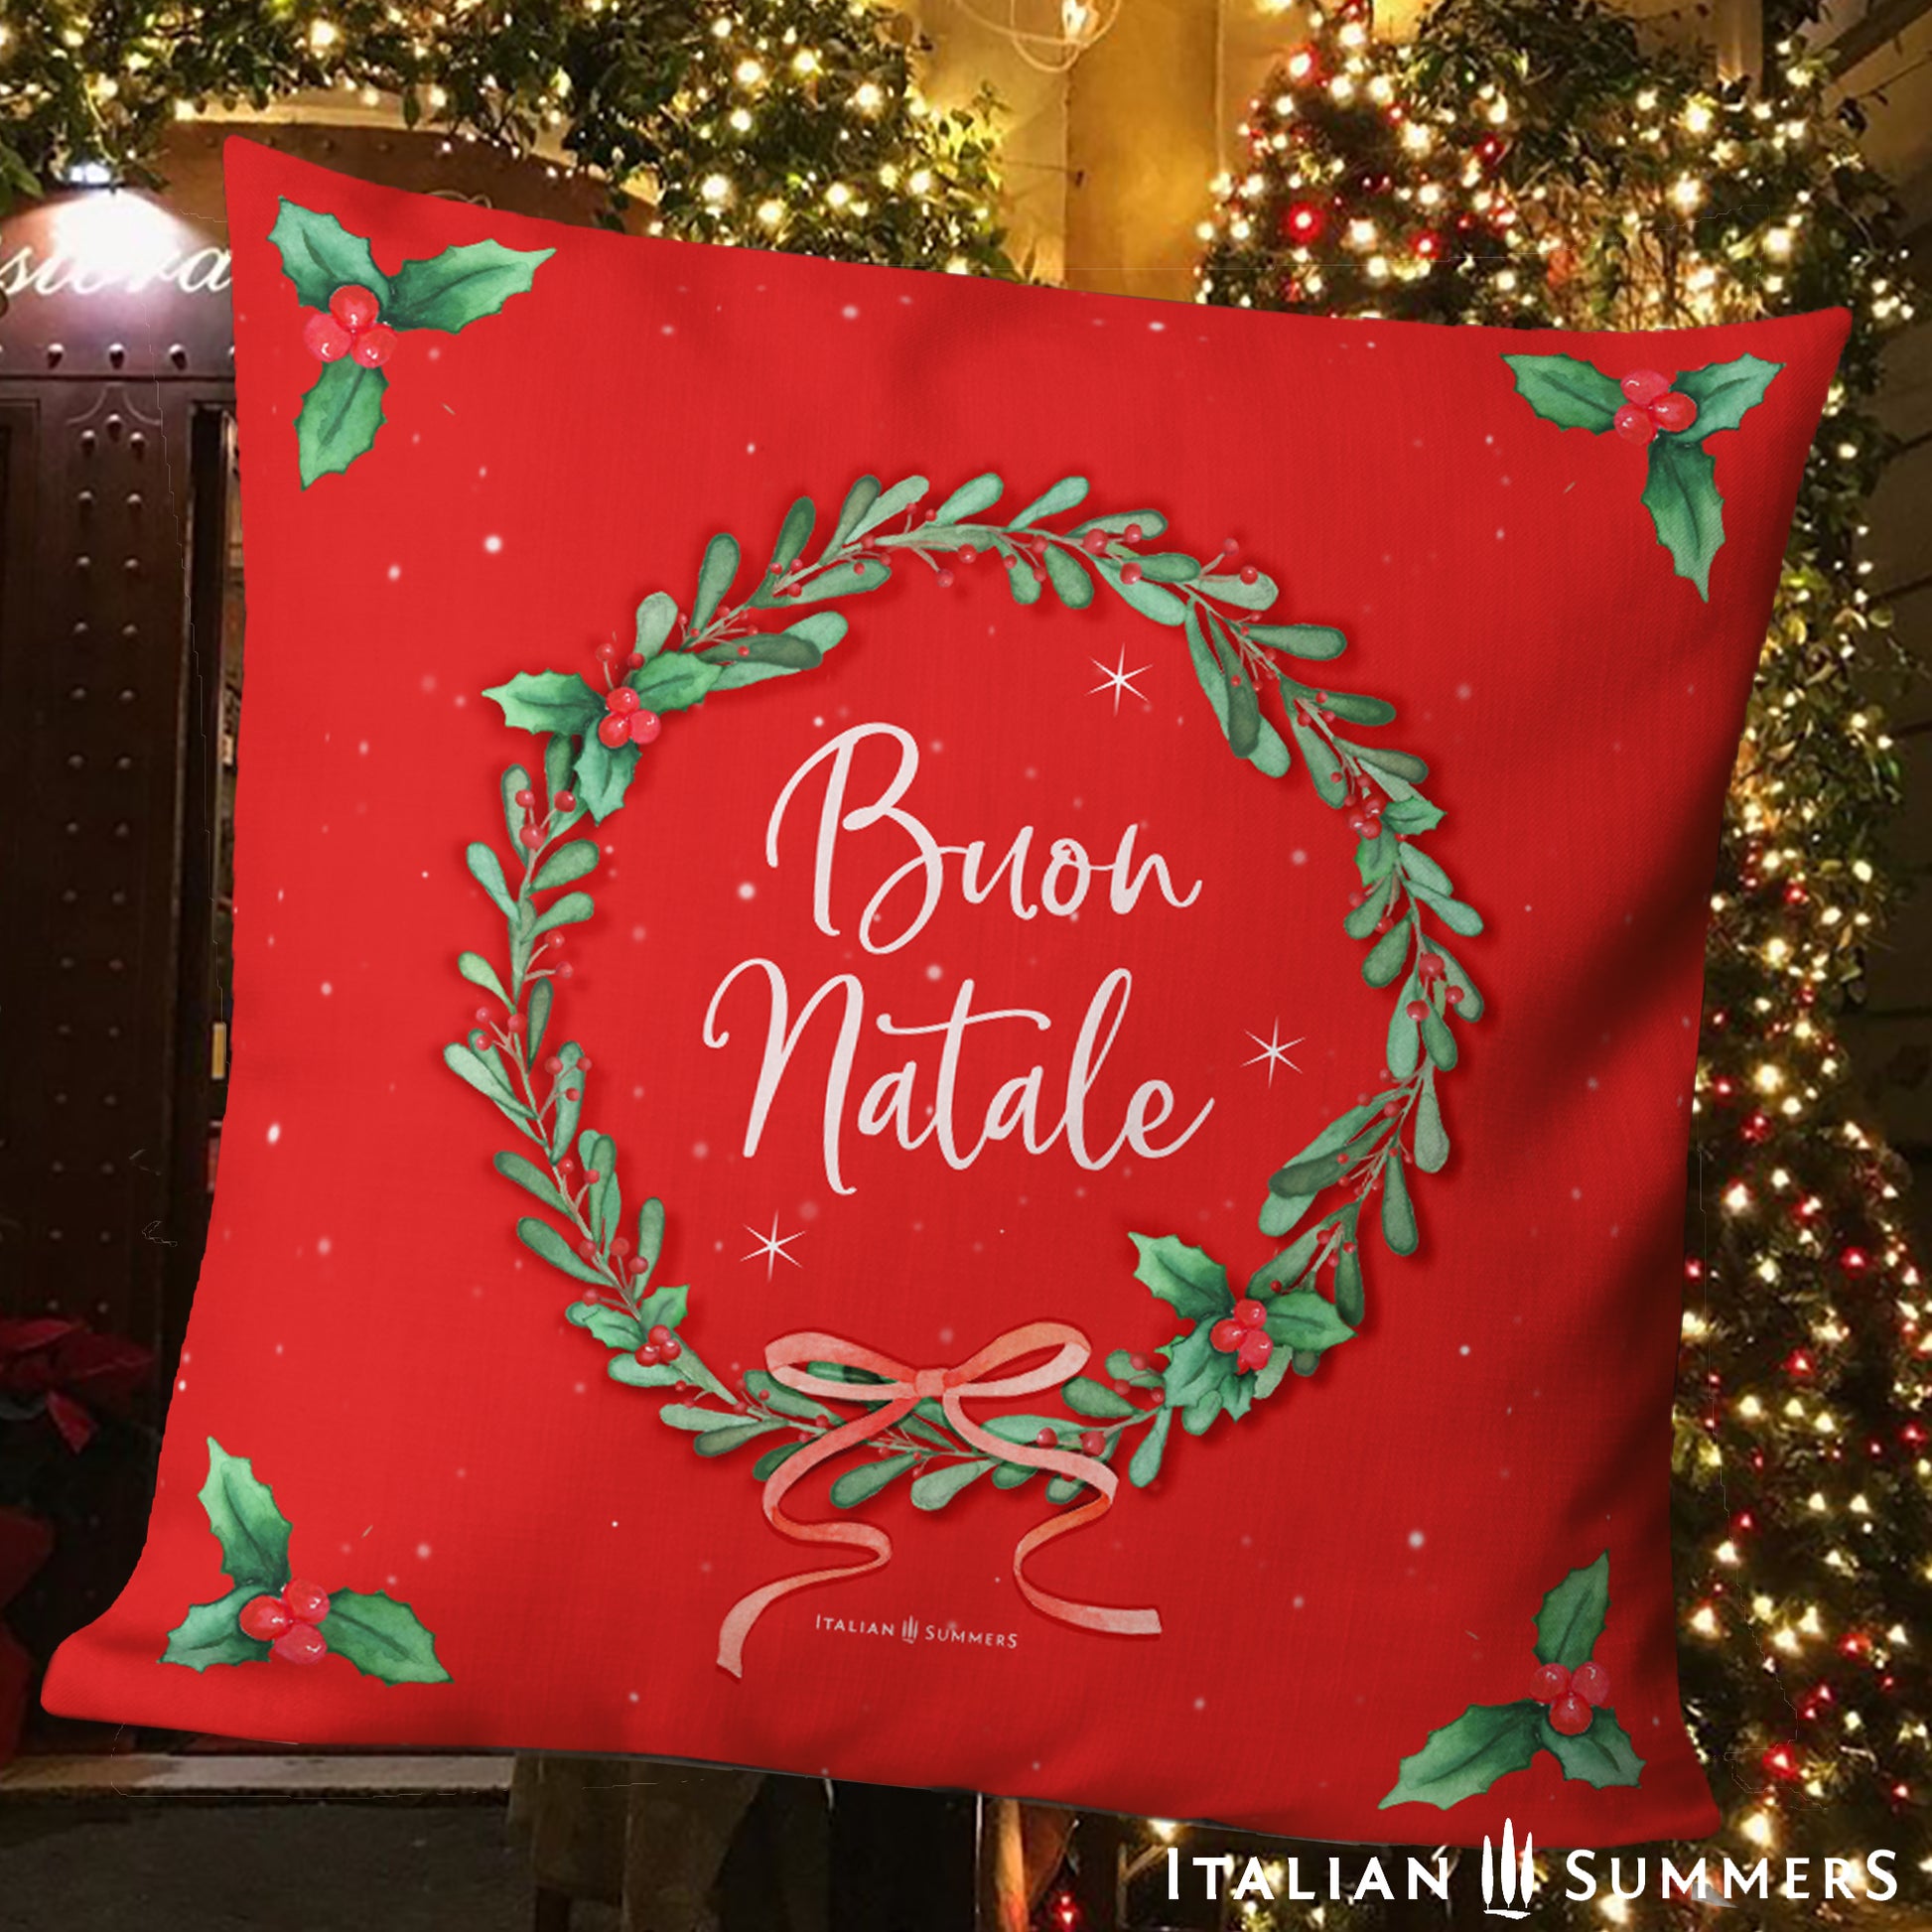  Pillow Case BUON NATALE! Showcasing a festive red design and a leafy green wreath, this cheerful pillow will bring some festive cheer to your living room. And with 'Buon Natale' written in the center